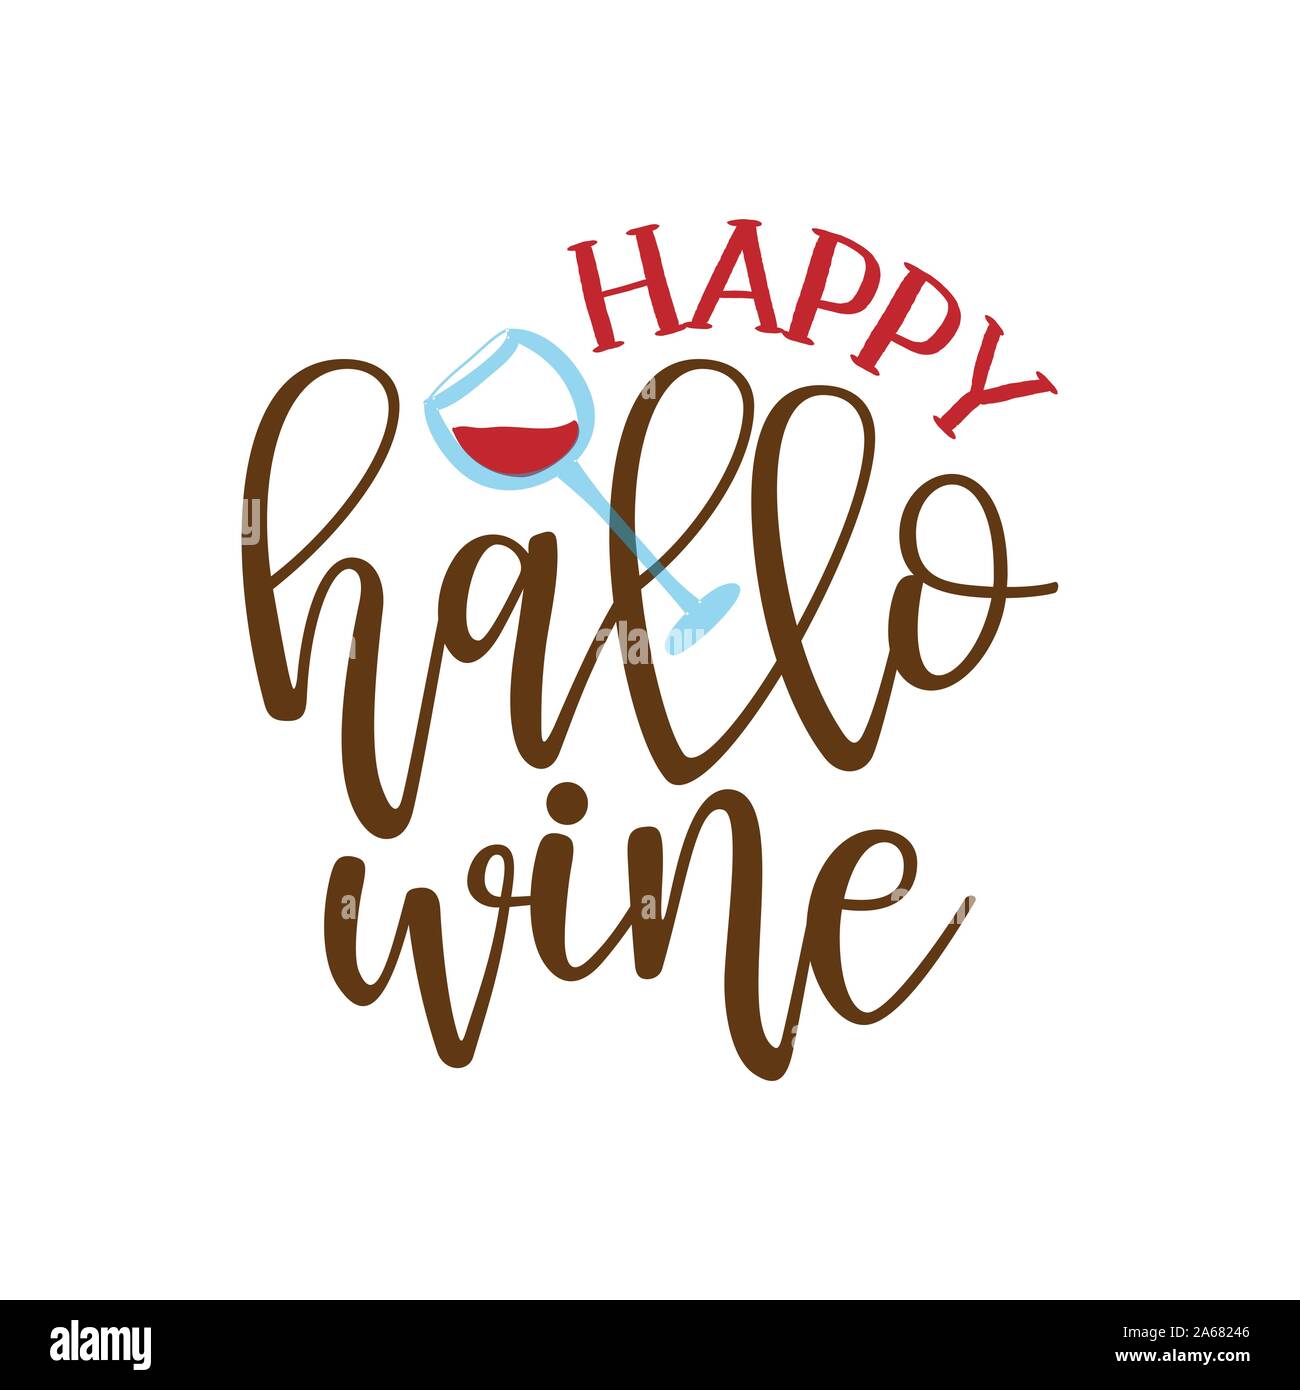 Happy Hallo Wine (halloween)- Hand drawn vector illustration. Autumn color poster. Good for scrap booking, posters, greeting cards, banners, textiles, Stock Vector